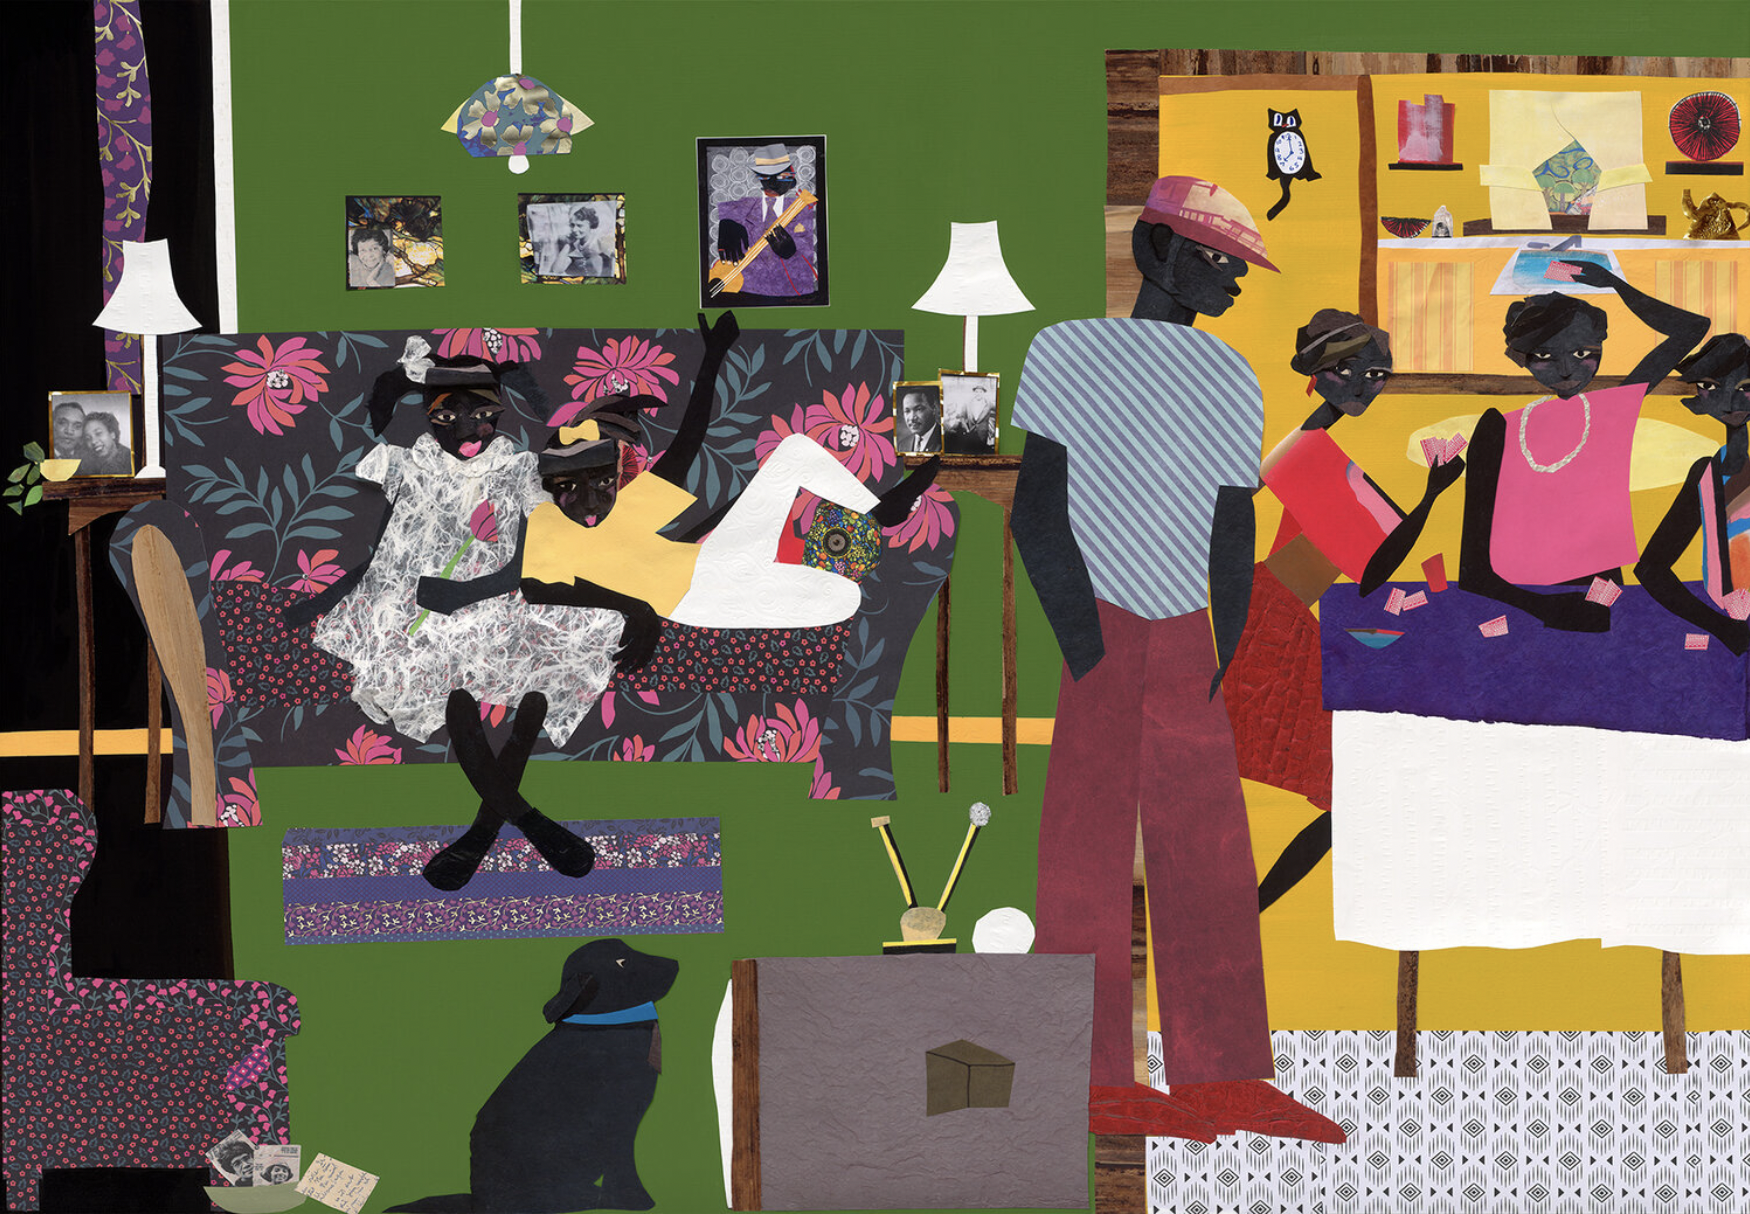 A colorful collage shows a joyful family scene in a living room. Two girls with a dark skin tone sit on a sofa in front of a TV, while the rest of the family sits and stands by a table playing cards. There are several black-and-white photographs of Martin Luther King and men and women with a dark skin tone in small, cut-out frames.